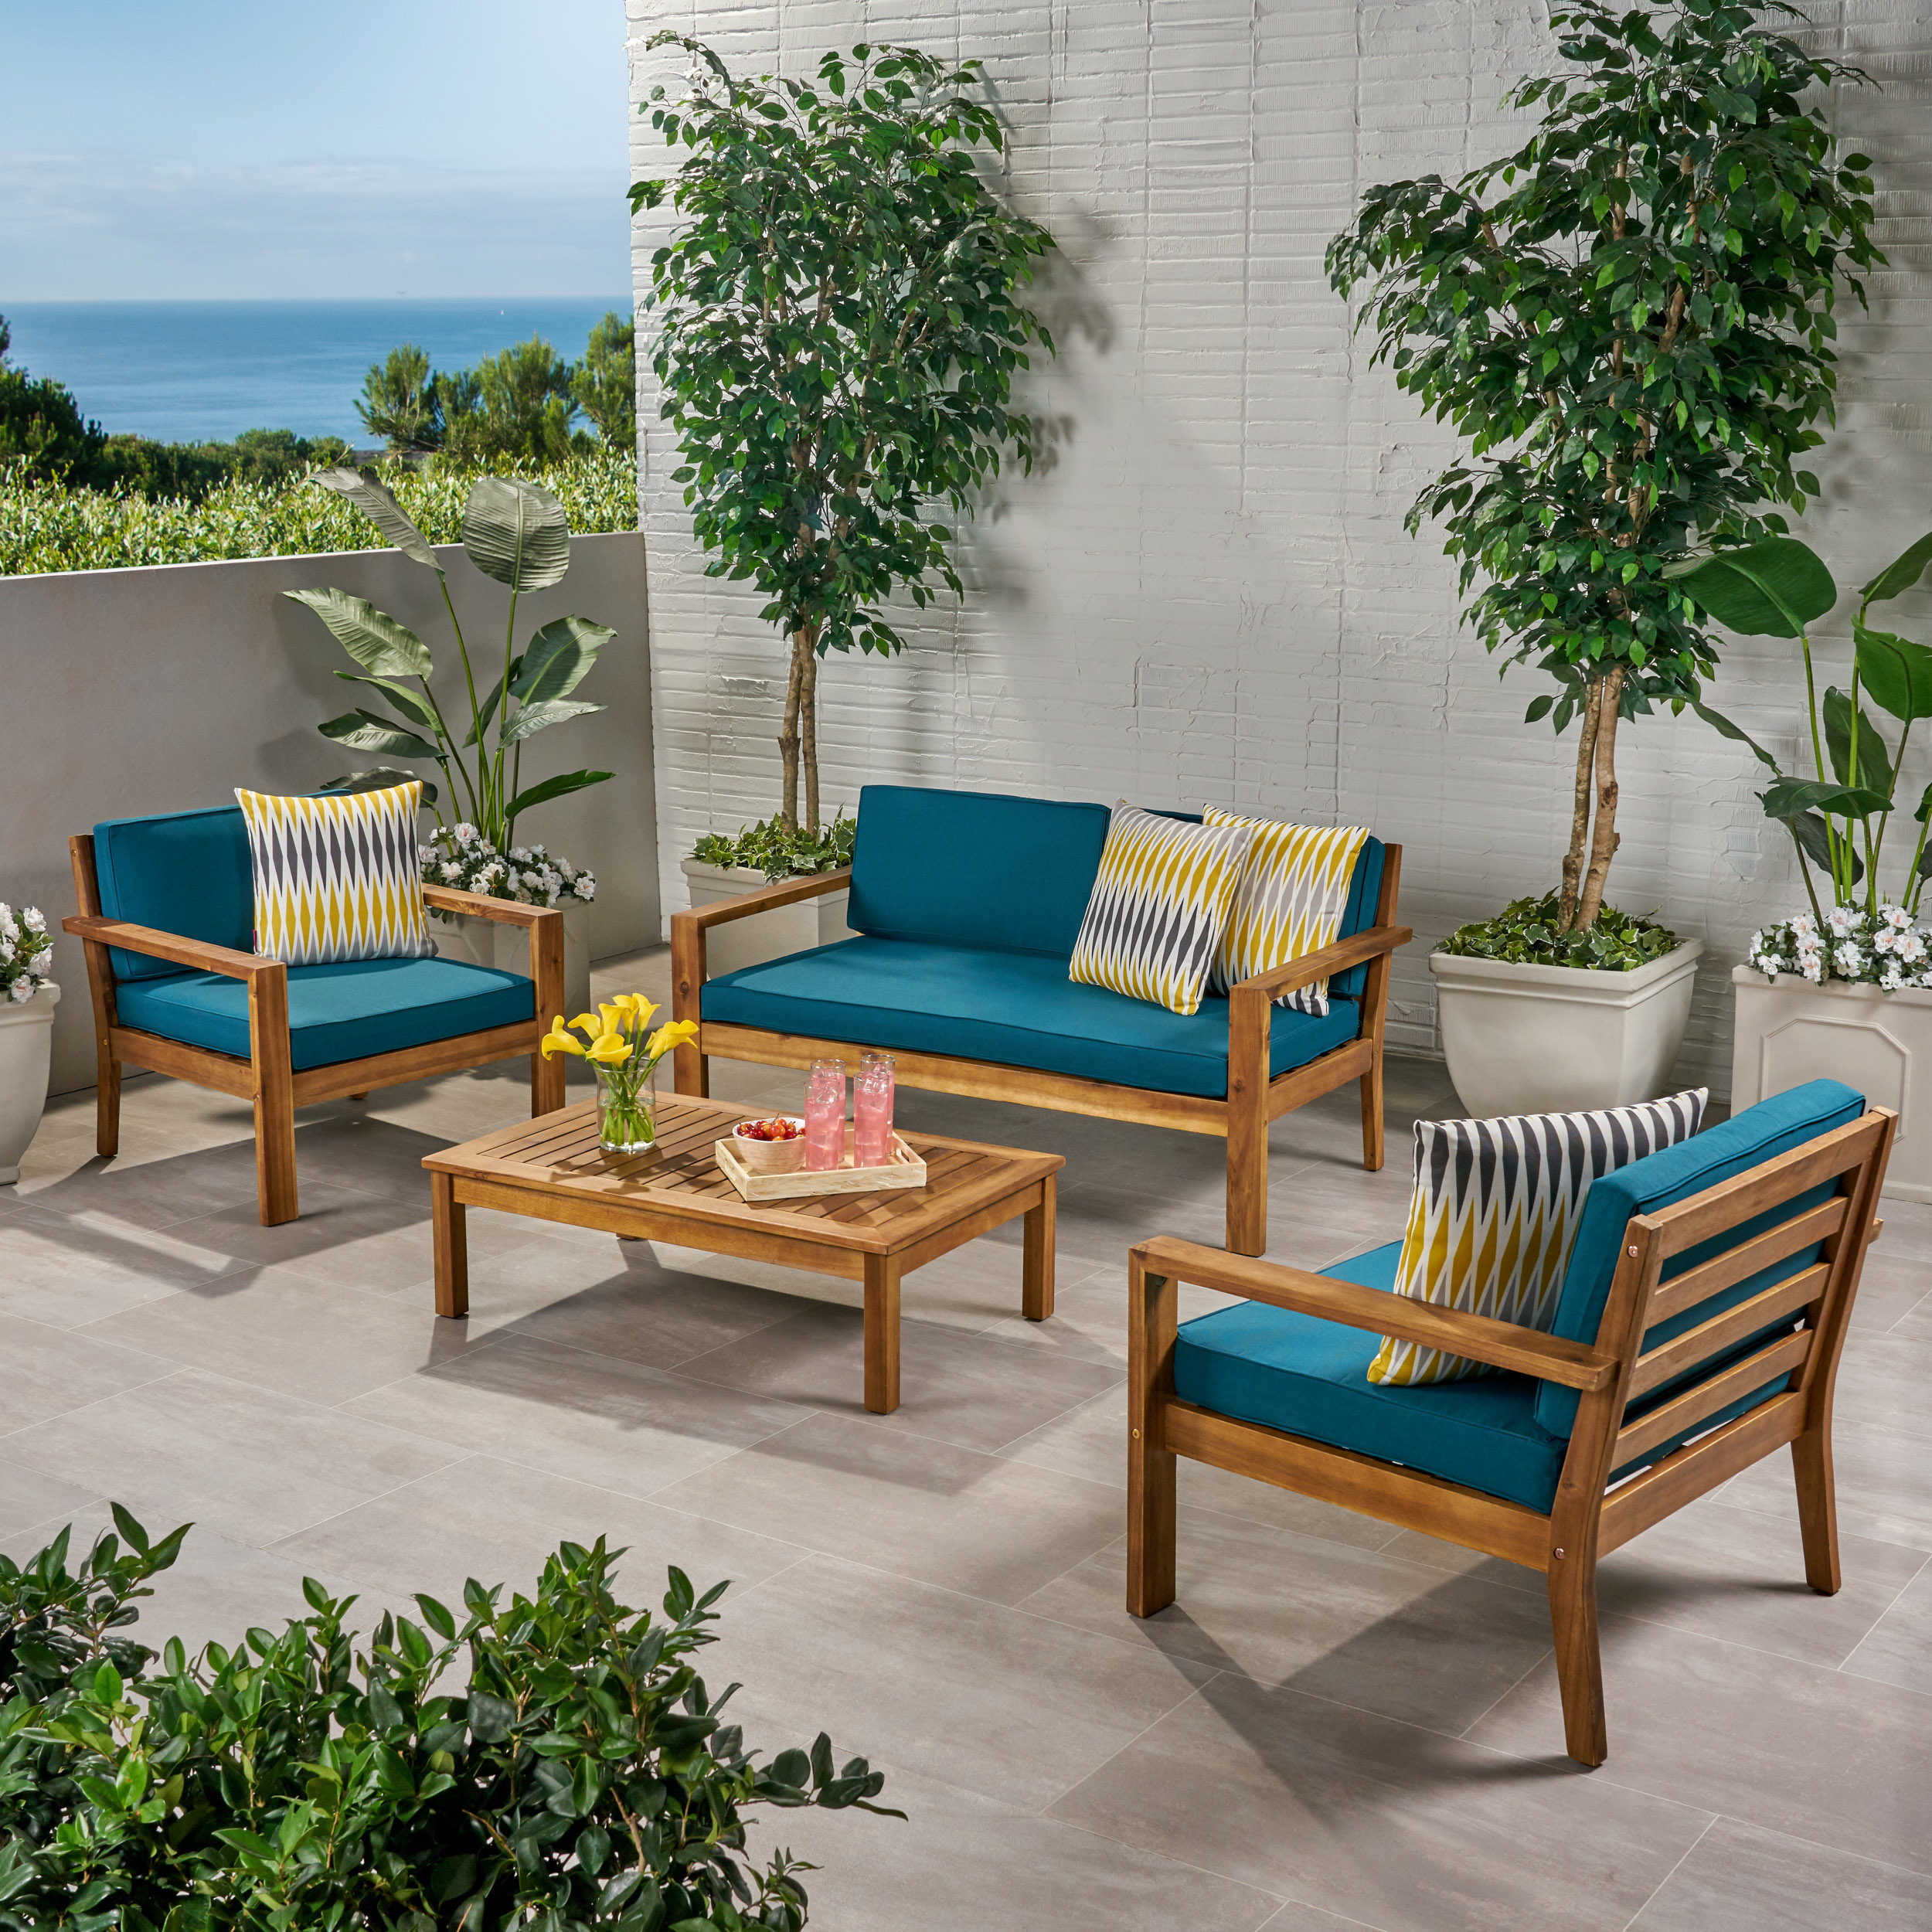 Gloria Outdoor 4 Seater Acacia Wood Chat Set With Cushions - Teak Finish, Dark Teal